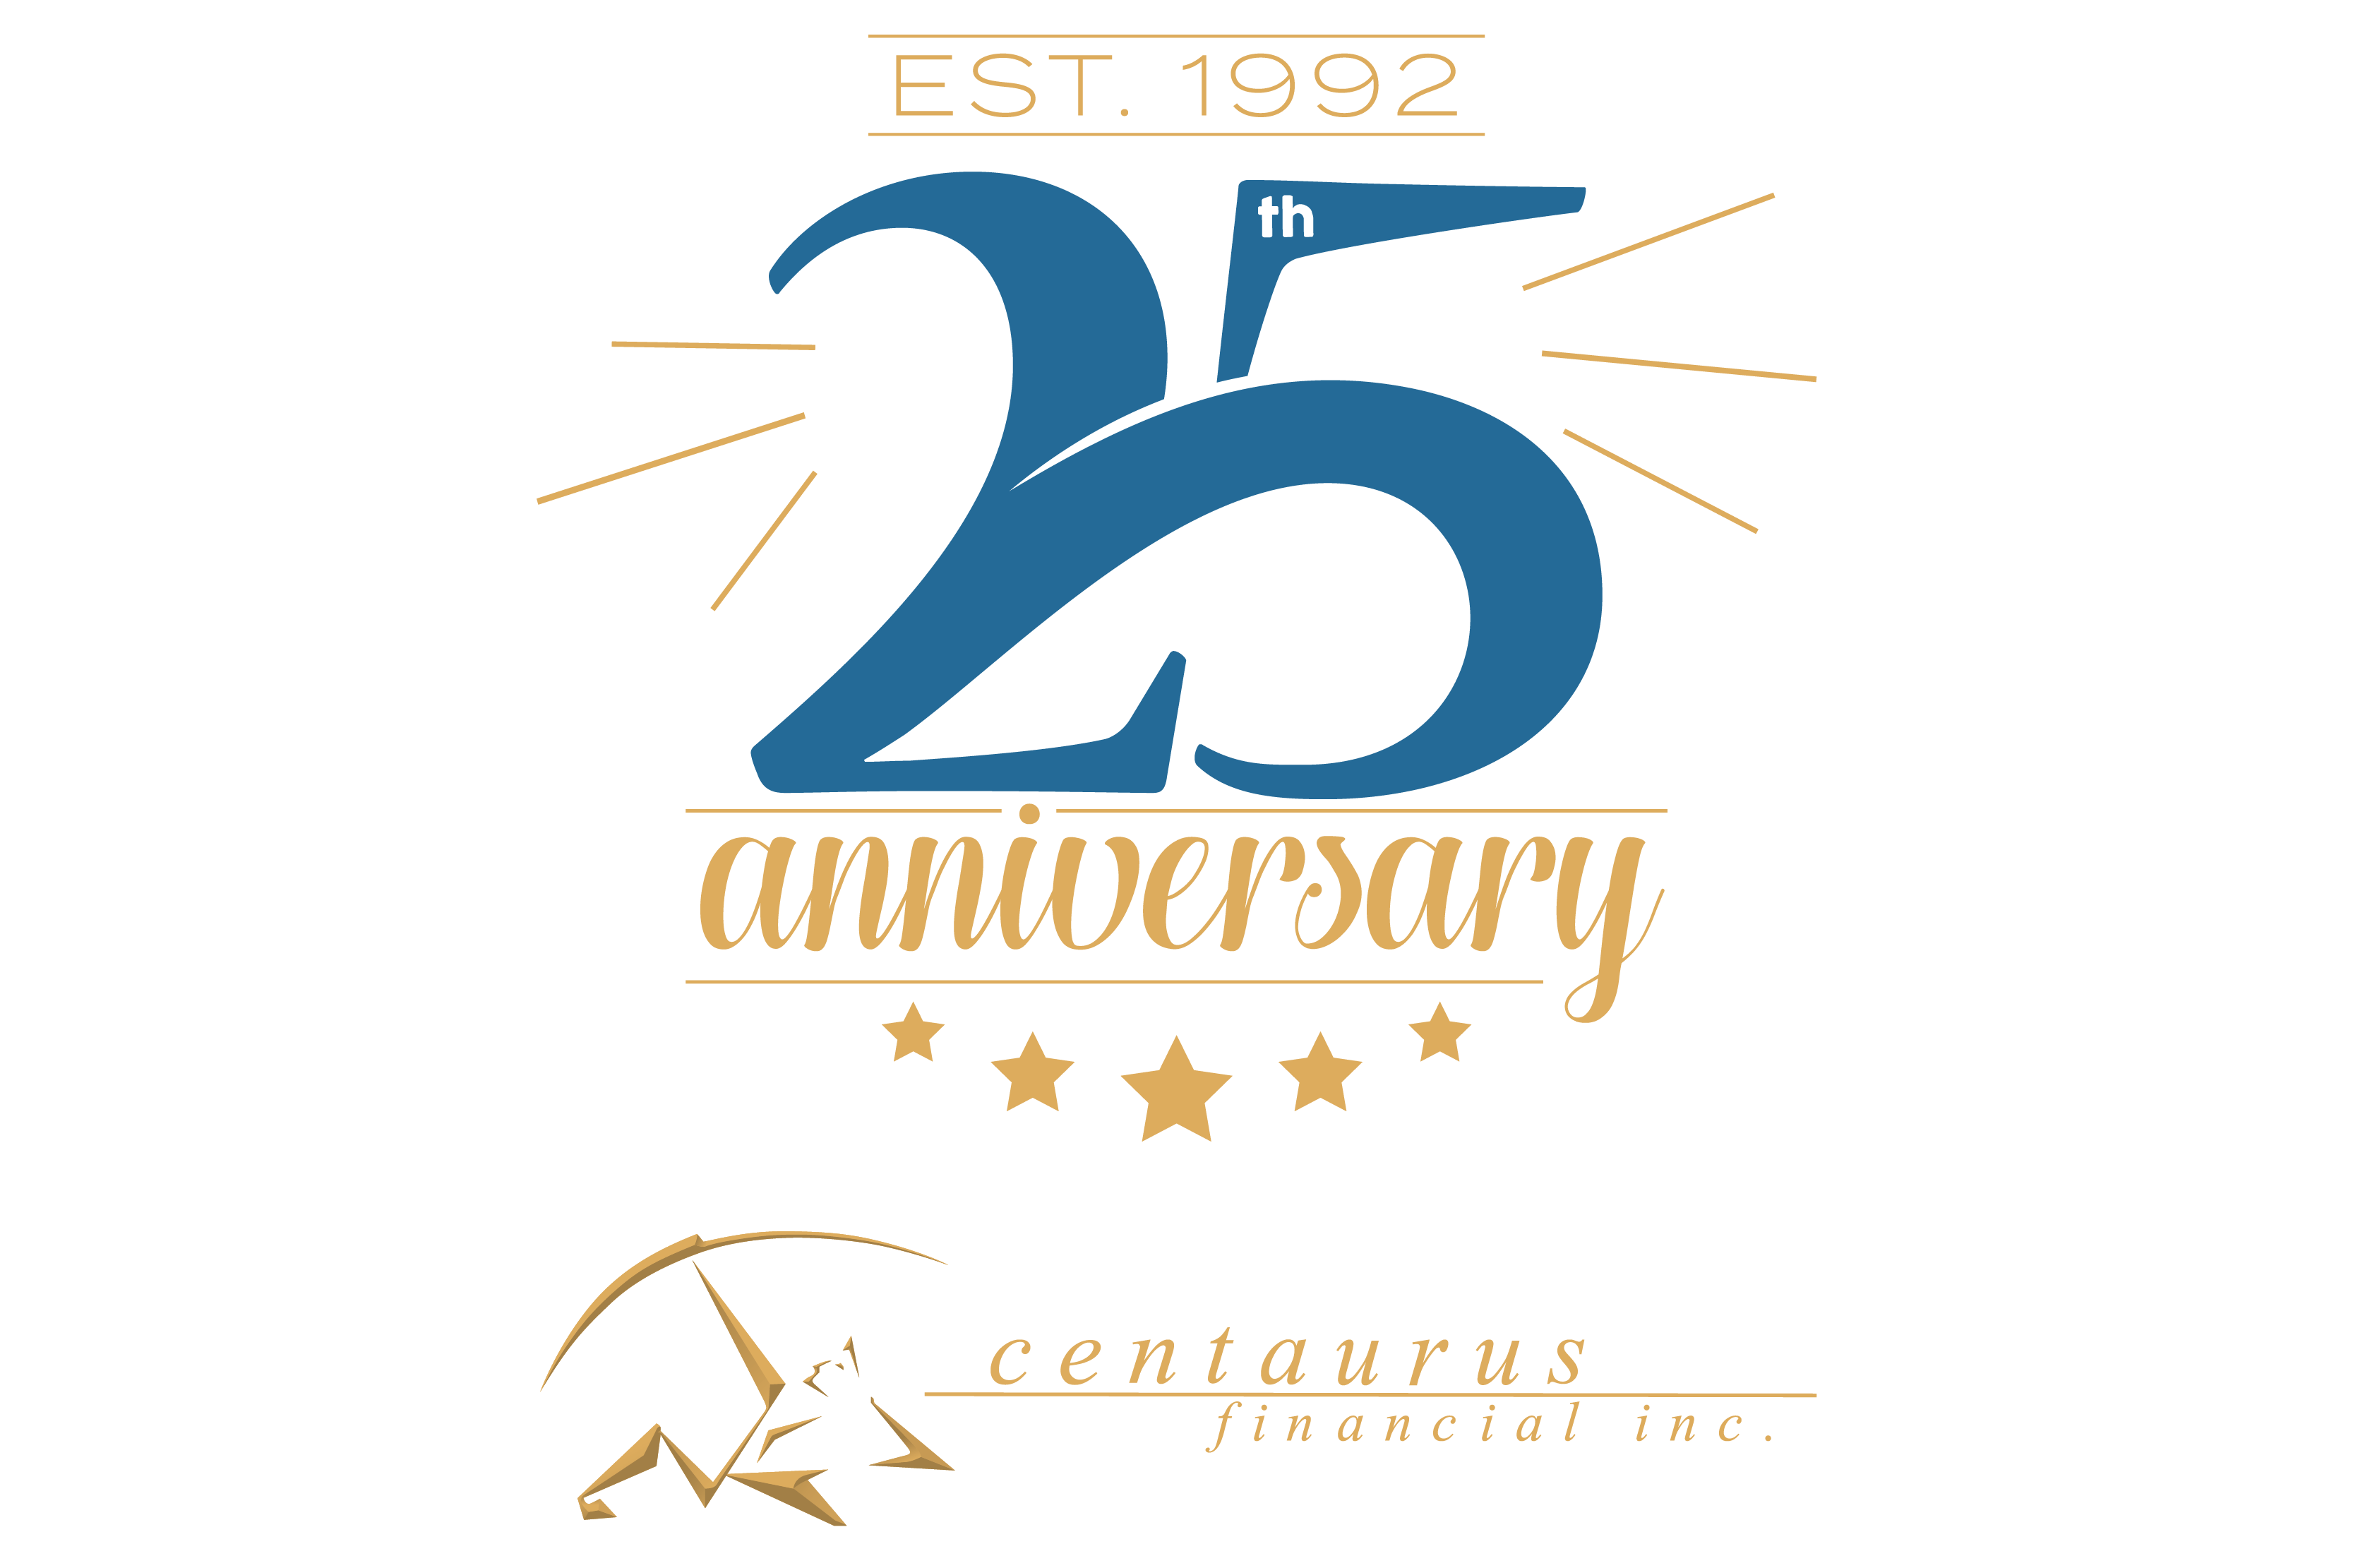 25. 25th Anniversary. 25 Anniversary. 25th Anniversary logo. 25th Anniversary PNG.